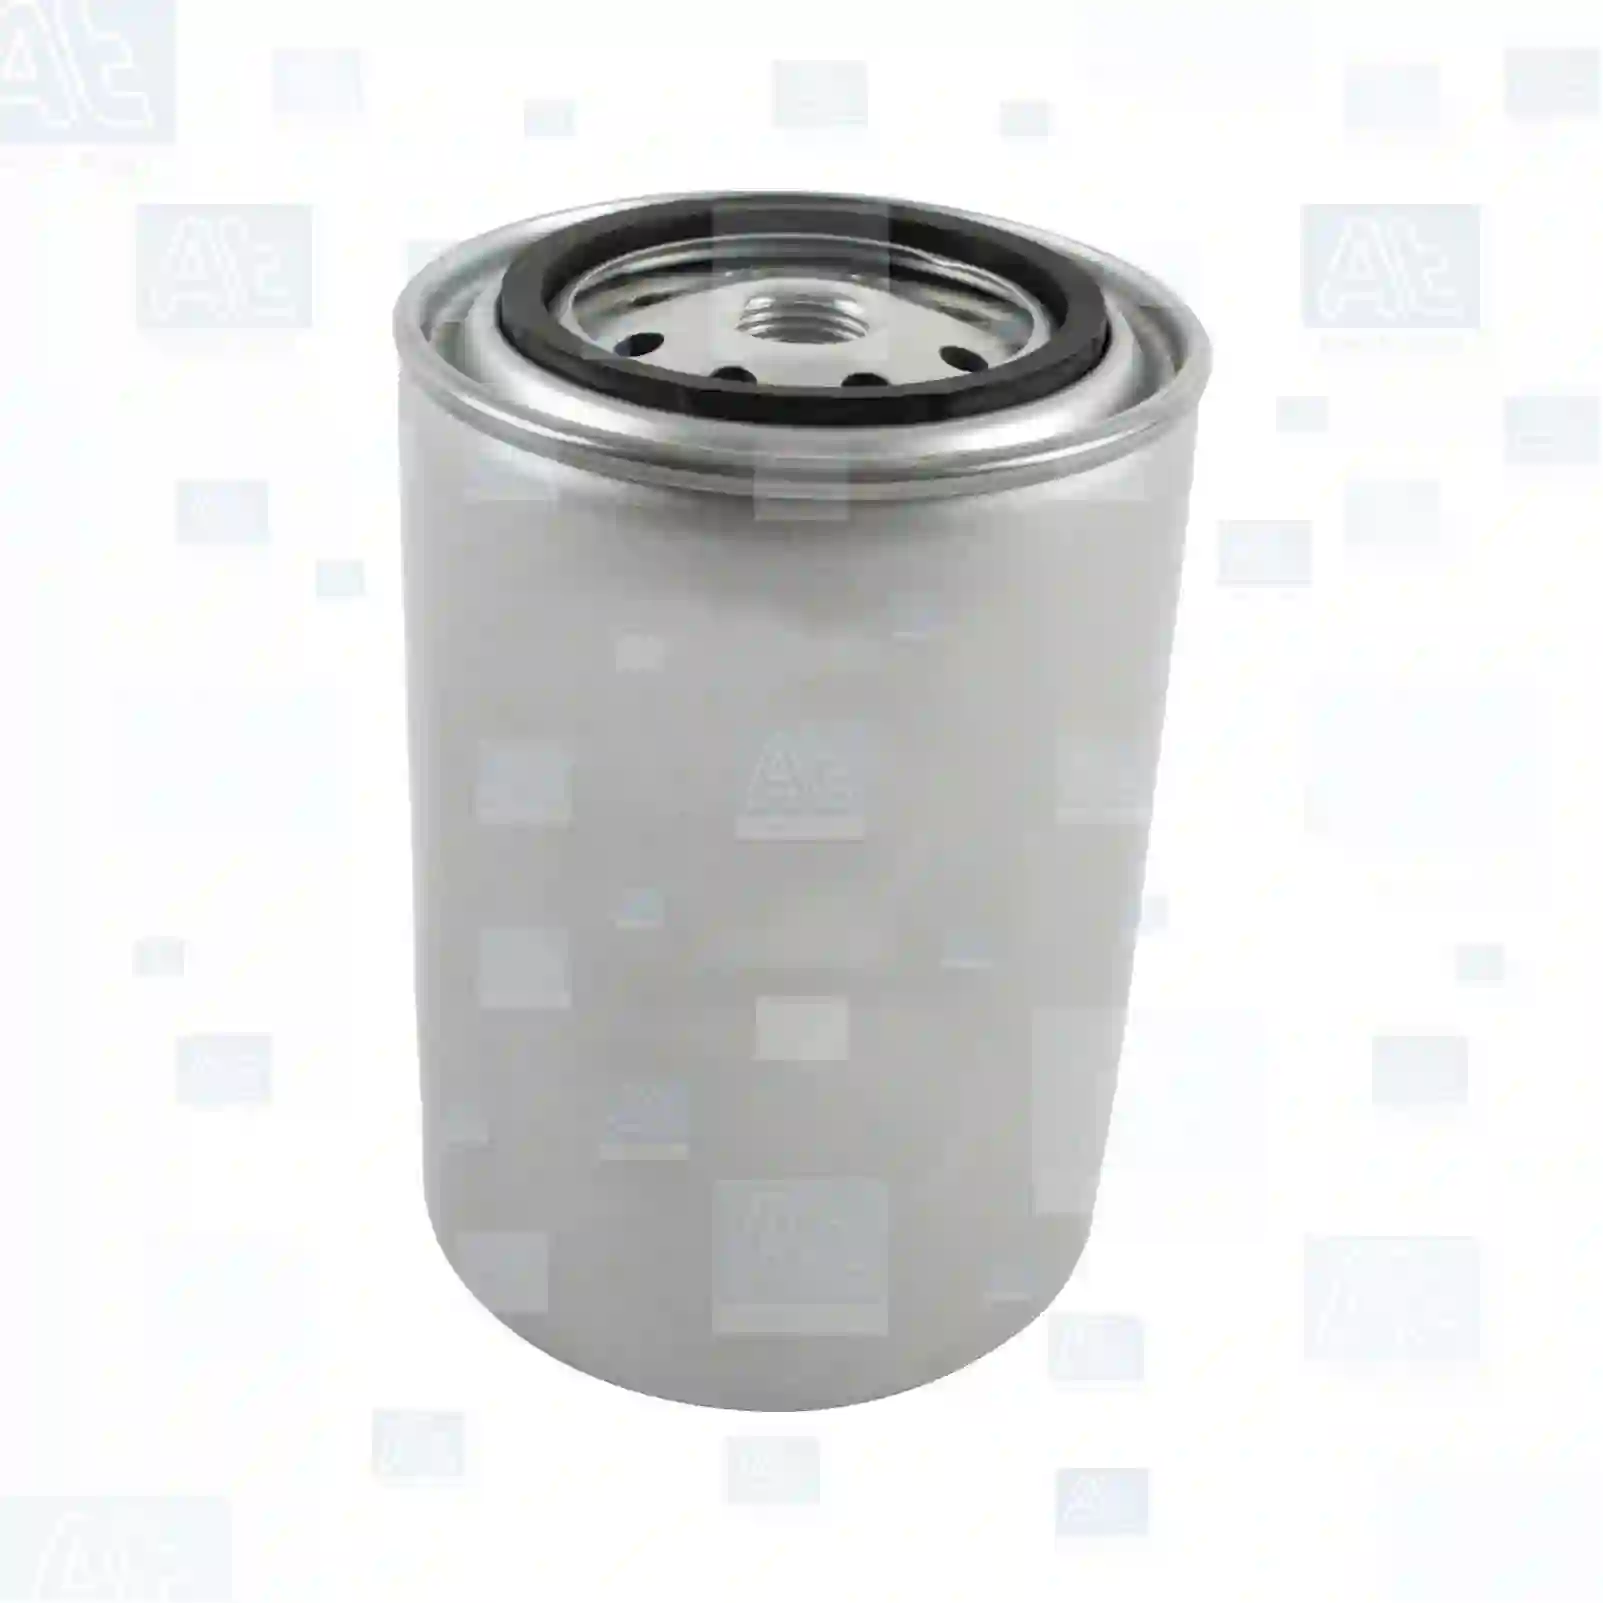 Coolant Filter Coolant filter, at no: 77707172 ,  oem no:40290892, 4029099, 4029120, 4393505, 70697635, 00049268, 01901776, 1329039C1, 419572C1, 423870C1, 427713C1, 427717C1, 441365C1, 462816C1, 993445C1, A151931, 9N-3368, 9N-3717, 9N-3719, 9Y-4529, 40599797, 4393504, 4681776, 70697635, 74029120, 209604, 254788, 254797, 259453, 290083, 290084, 298080, 299080, 299082, 299084, 299880, 3304879, 3310752, 3315789, 13692, 1355382, C299080, C3305367, C33055367, C3305567, C3314521, C3315789, 4786765, 00049268, 01851101, 01907694, 01930549, 03648966, 04029084, 04734562, 70697135, 70697635, 74029089, 74029120, 74059979, 74393505, 74681776, 74734562, 76106535, Y02229203, Y02729203, Y05774308, 1602113, 9843662, DNP554071, DNP554744, 12490162, 23507545, 23508425, 6438919, 6438920, 6439692, 6439766, 6438919, 6438920, 6439692, 01901776, 01930549, 04734562, 04739628, 1901776, 1930549, 4734562, 70029126, 70679635, 74029089, 74393505, AR87113, AR87114, AR89380, K251C271, K251C272, K251C342, KW2010, KW2051, 5602719, 7361501, 7361502, IN7361501, 2191P554071, 25MF214, 25MF214A, 25MF214P2, 1055916M1, 21915-95000, 0512185, PB2051, PM2051, V1350570, V1350579, 5000808721, 5001004324, OE46264, OF46264, 299080, 661302, 1696300311, 0120390456, 2191595000, 2191599032, 4054555, 12002929, 129680286, 200973329, 3130940, 3130941, 366822, 4099799, 79250031, 8390135, 027073723, 027073724, 027074037, 027074038, 027077520, 200973329, 207015003, 2070150030, 27073723, 27073724, 27074037, 27074038, 27074039, 7073724, 7074037, 7090917 At Spare Part | Engine, Accelerator Pedal, Camshaft, Connecting Rod, Crankcase, Crankshaft, Cylinder Head, Engine Suspension Mountings, Exhaust Manifold, Exhaust Gas Recirculation, Filter Kits, Flywheel Housing, General Overhaul Kits, Engine, Intake Manifold, Oil Cleaner, Oil Cooler, Oil Filter, Oil Pump, Oil Sump, Piston & Liner, Sensor & Switch, Timing Case, Turbocharger, Cooling System, Belt Tensioner, Coolant Filter, Coolant Pipe, Corrosion Prevention Agent, Drive, Expansion Tank, Fan, Intercooler, Monitors & Gauges, Radiator, Thermostat, V-Belt / Timing belt, Water Pump, Fuel System, Electronical Injector Unit, Feed Pump, Fuel Filter, cpl., Fuel Gauge Sender,  Fuel Line, Fuel Pump, Fuel Tank, Injection Line Kit, Injection Pump, Exhaust System, Clutch & Pedal, Gearbox, Propeller Shaft, Axles, Brake System, Hubs & Wheels, Suspension, Leaf Spring, Universal Parts / Accessories, Steering, Electrical System, Cabin